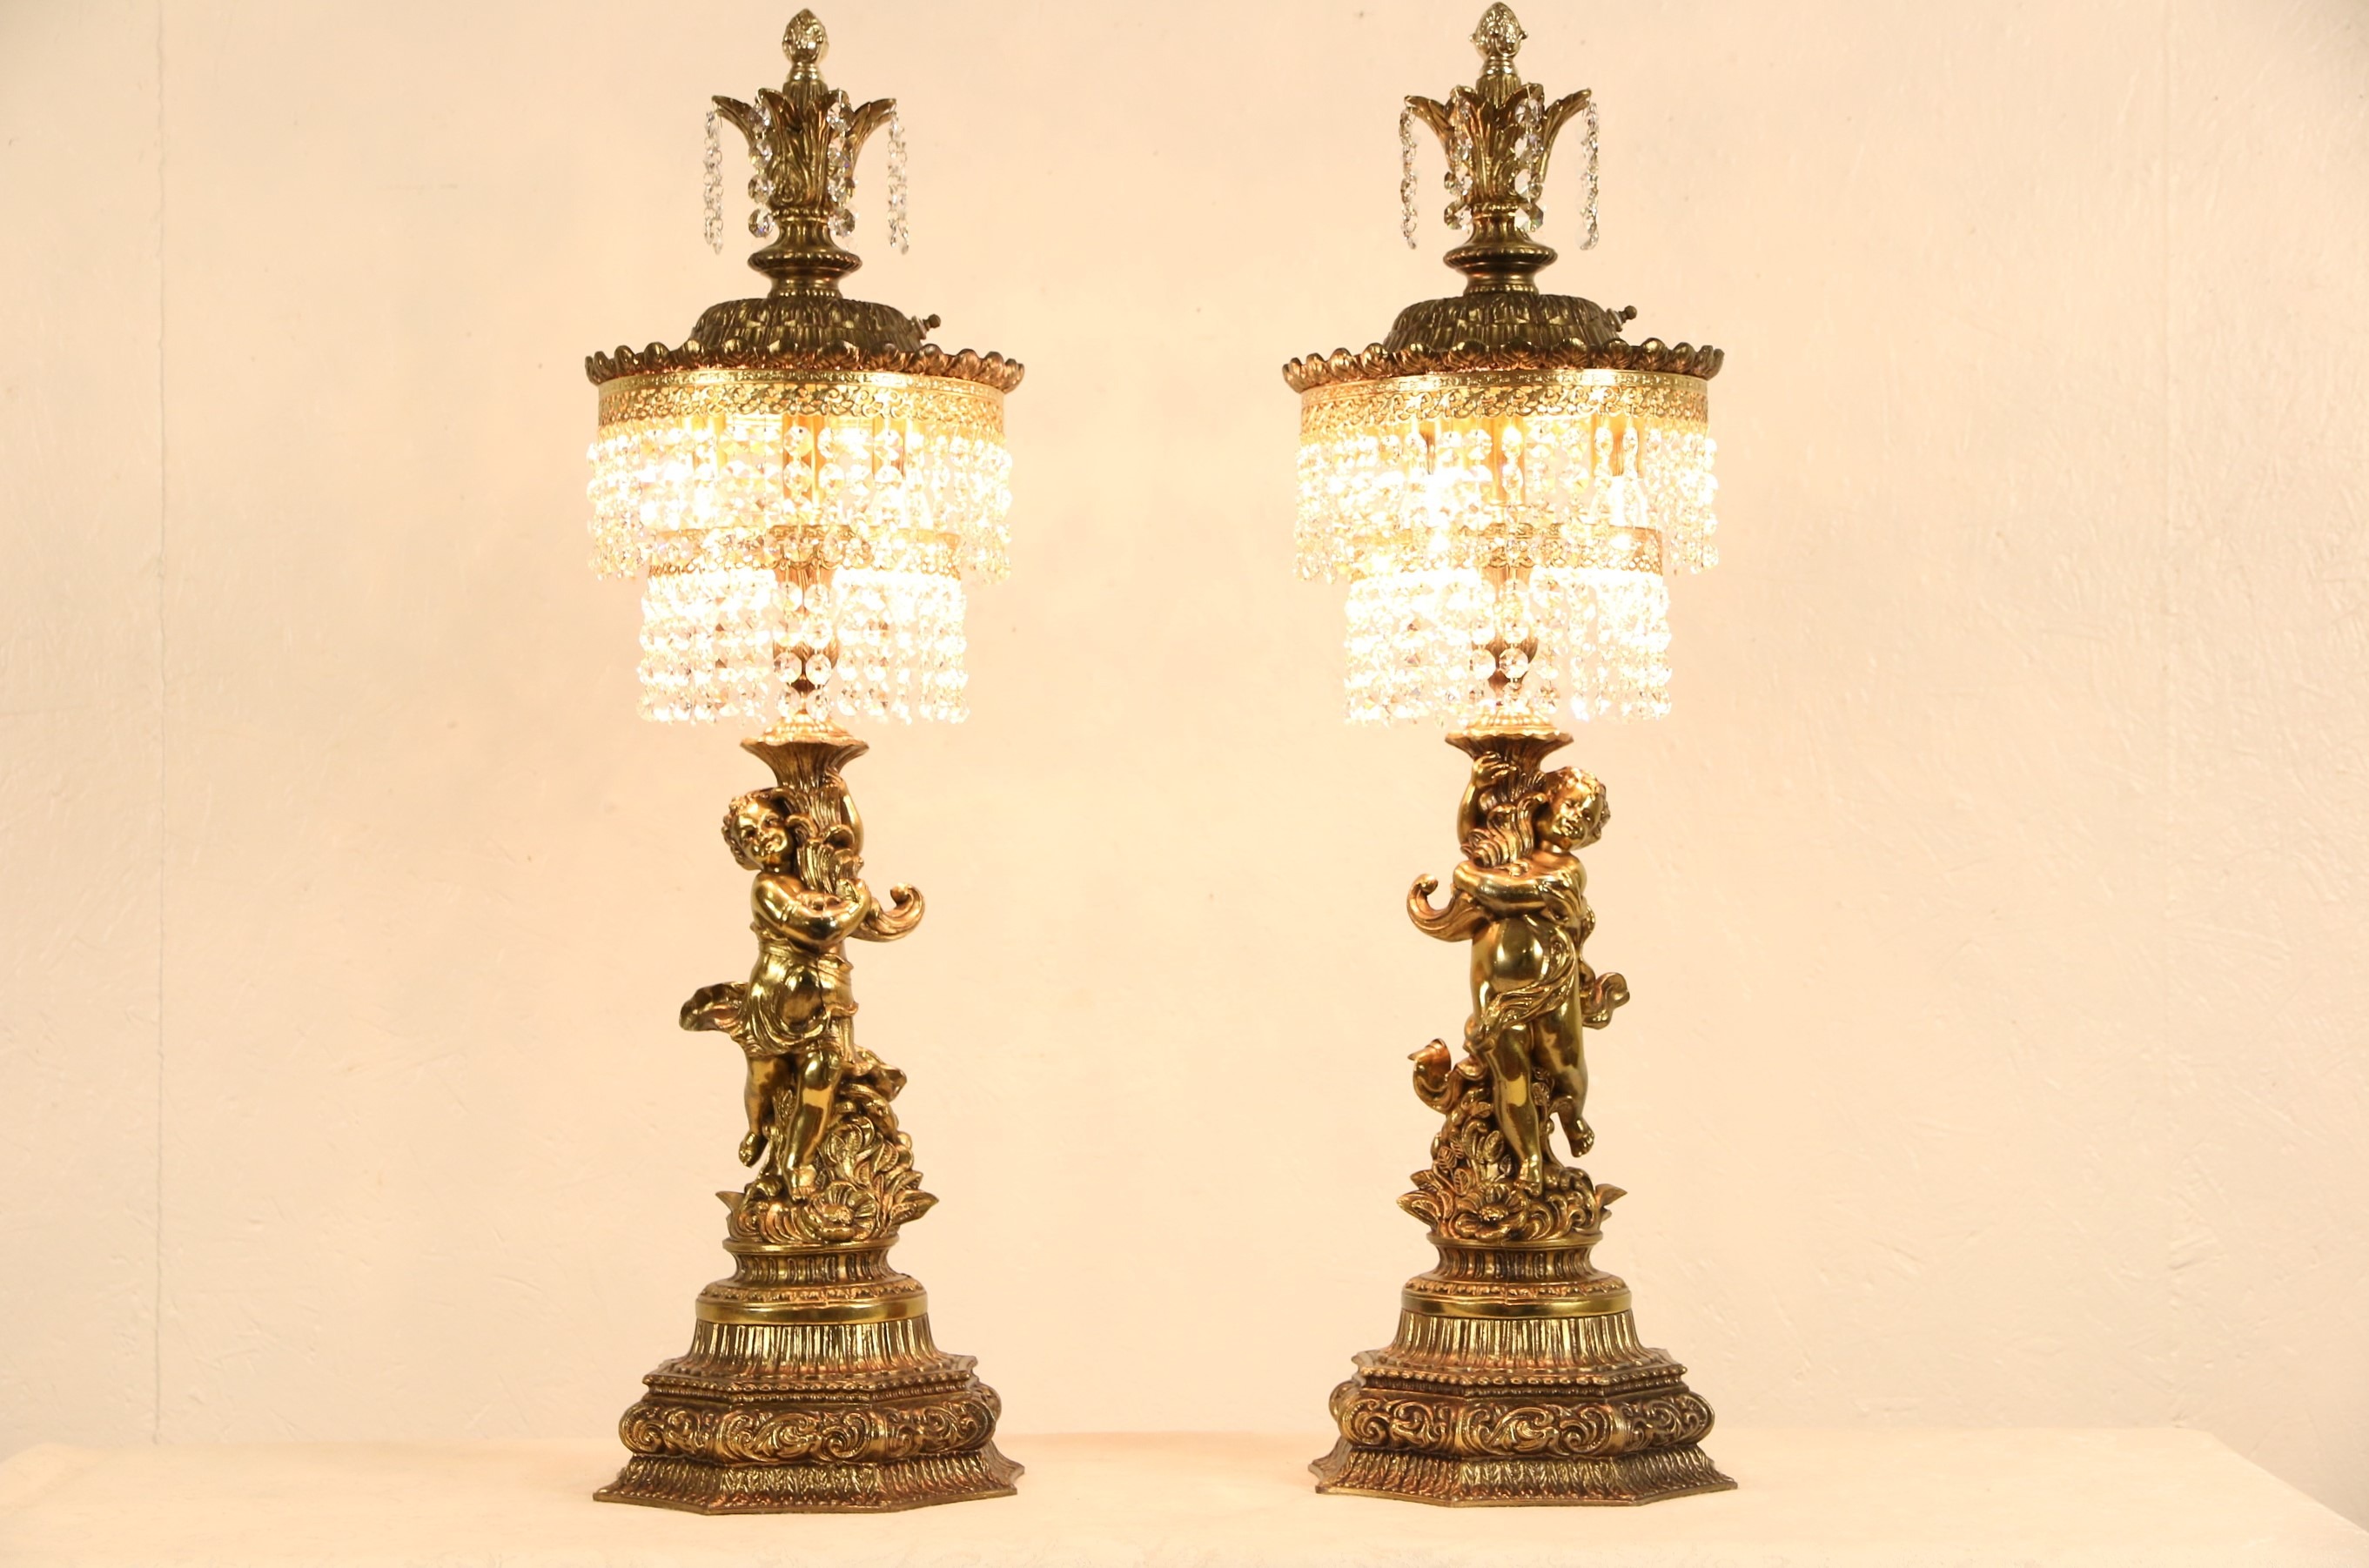 Vintage Pair of Brass and Glass Cherub Lamps, Glass Prisms, Brass